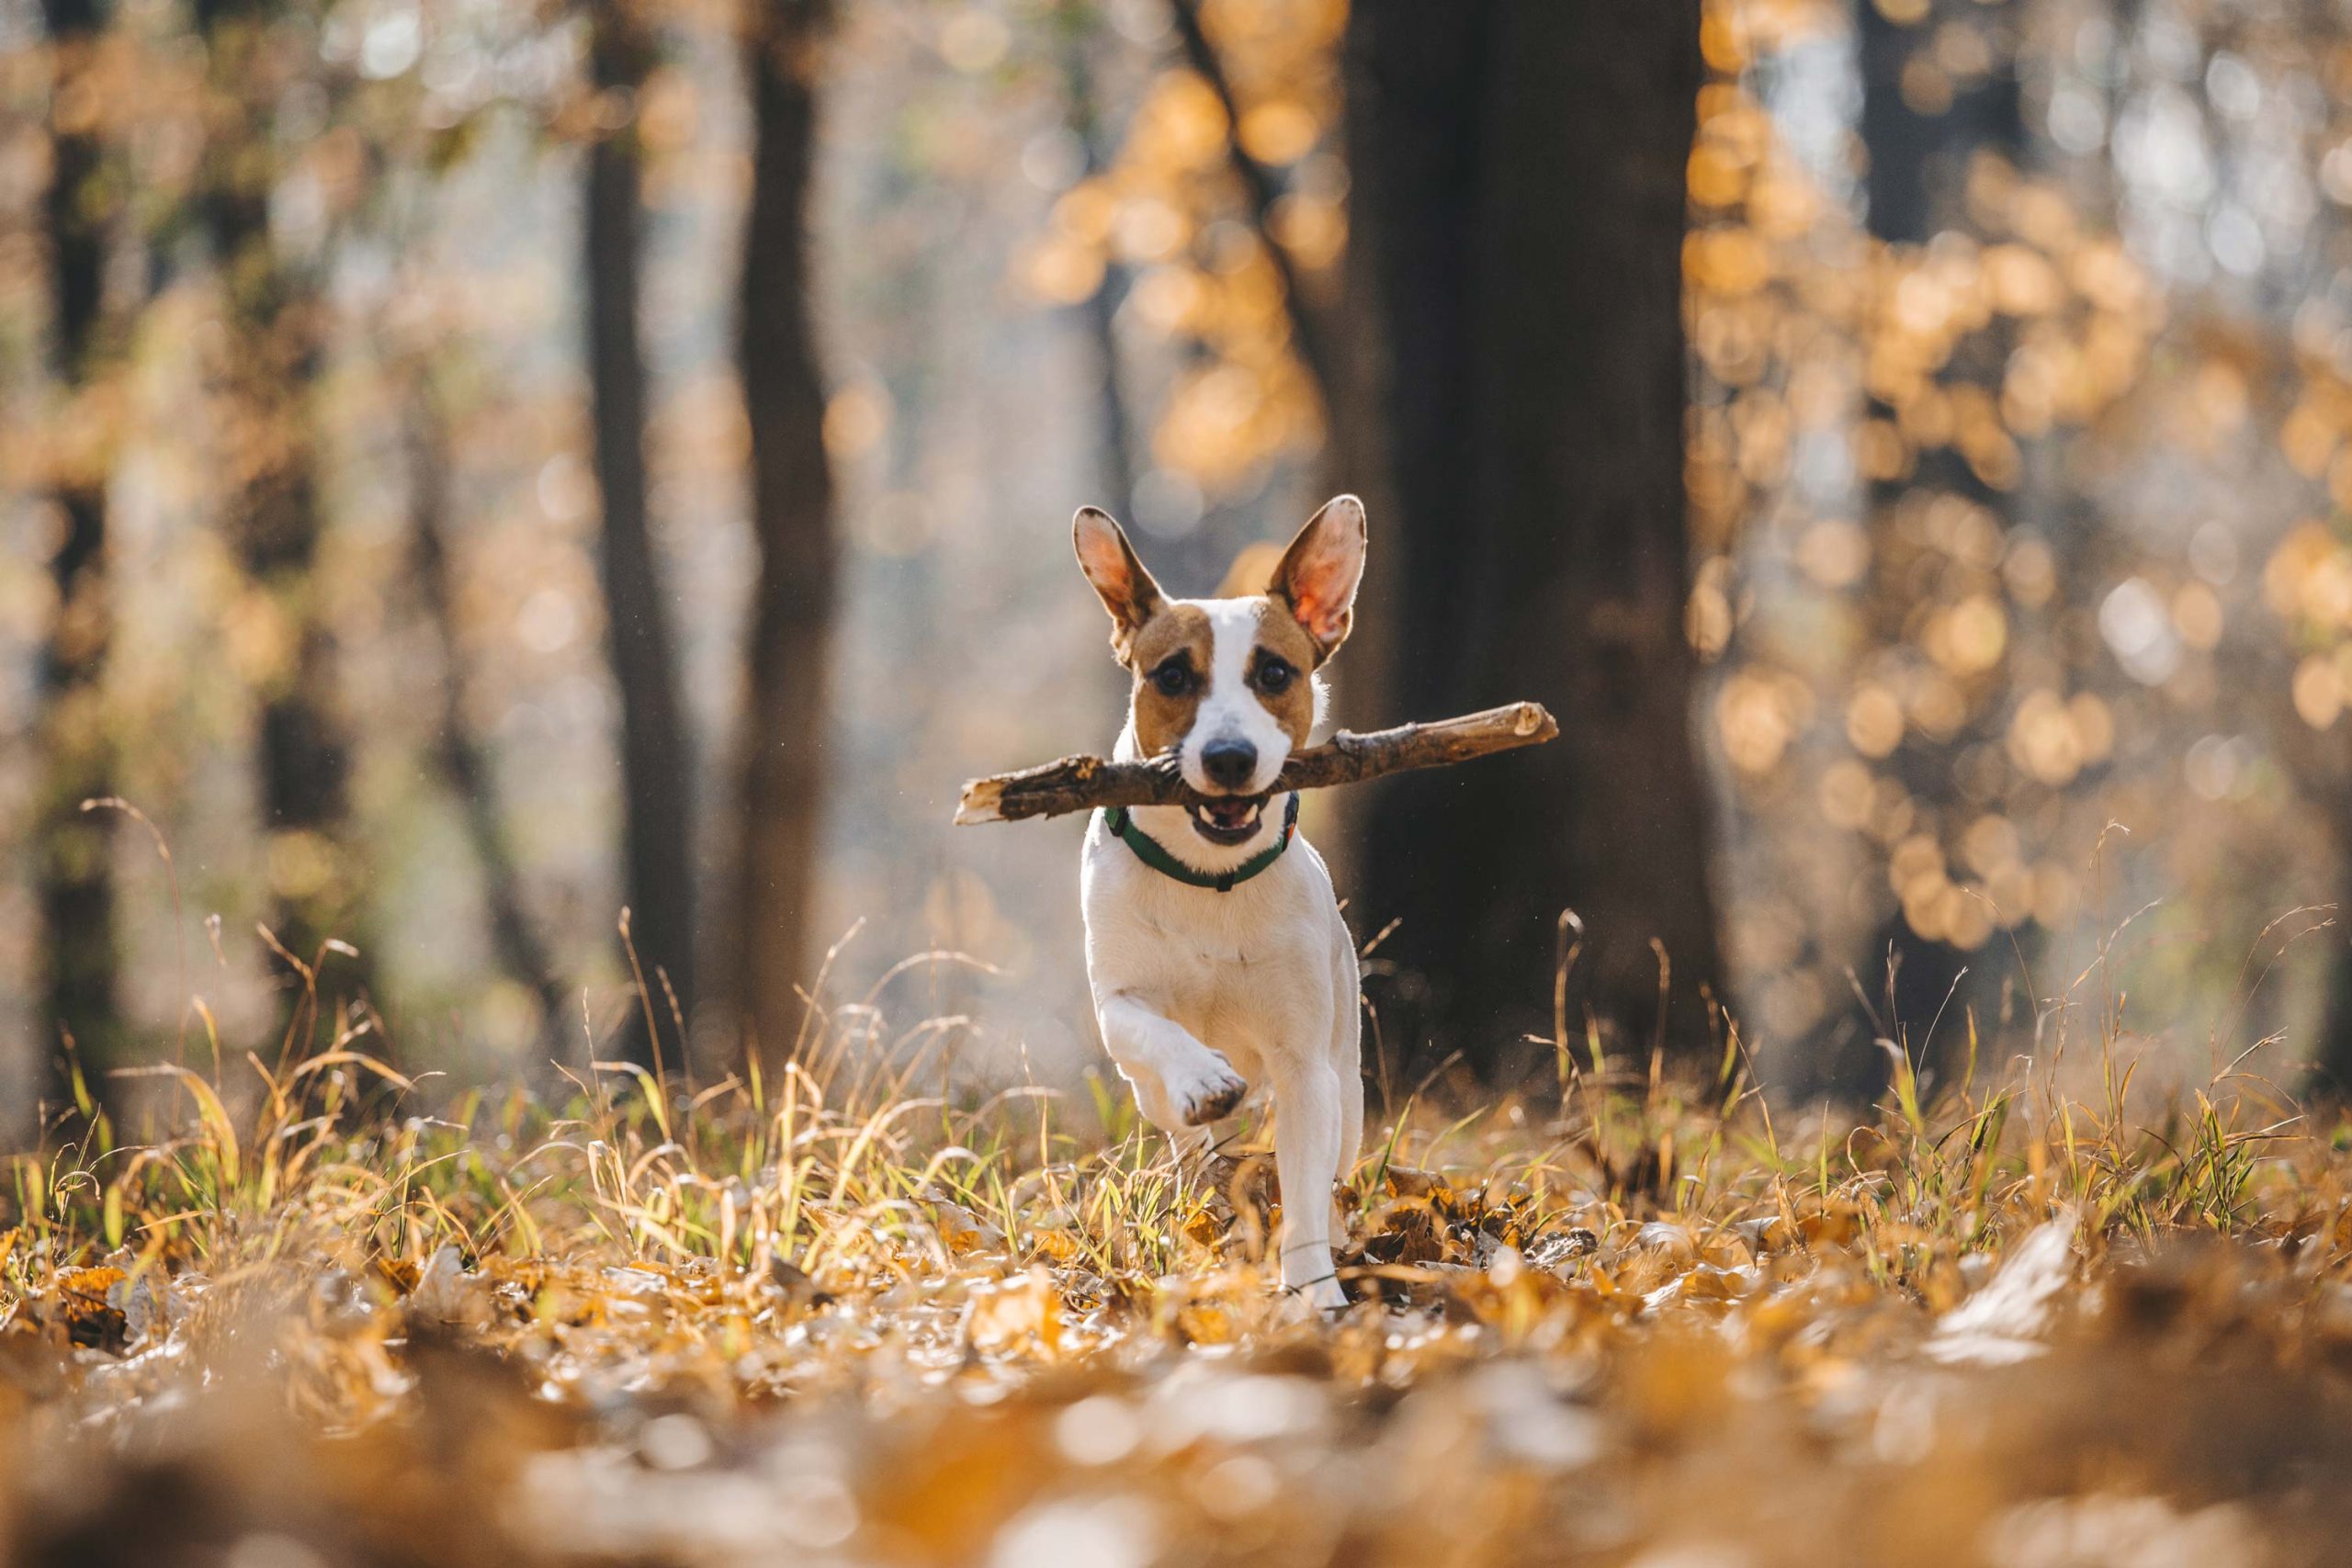 A small dog racing through an autumnal woodland with a stick in its mouth